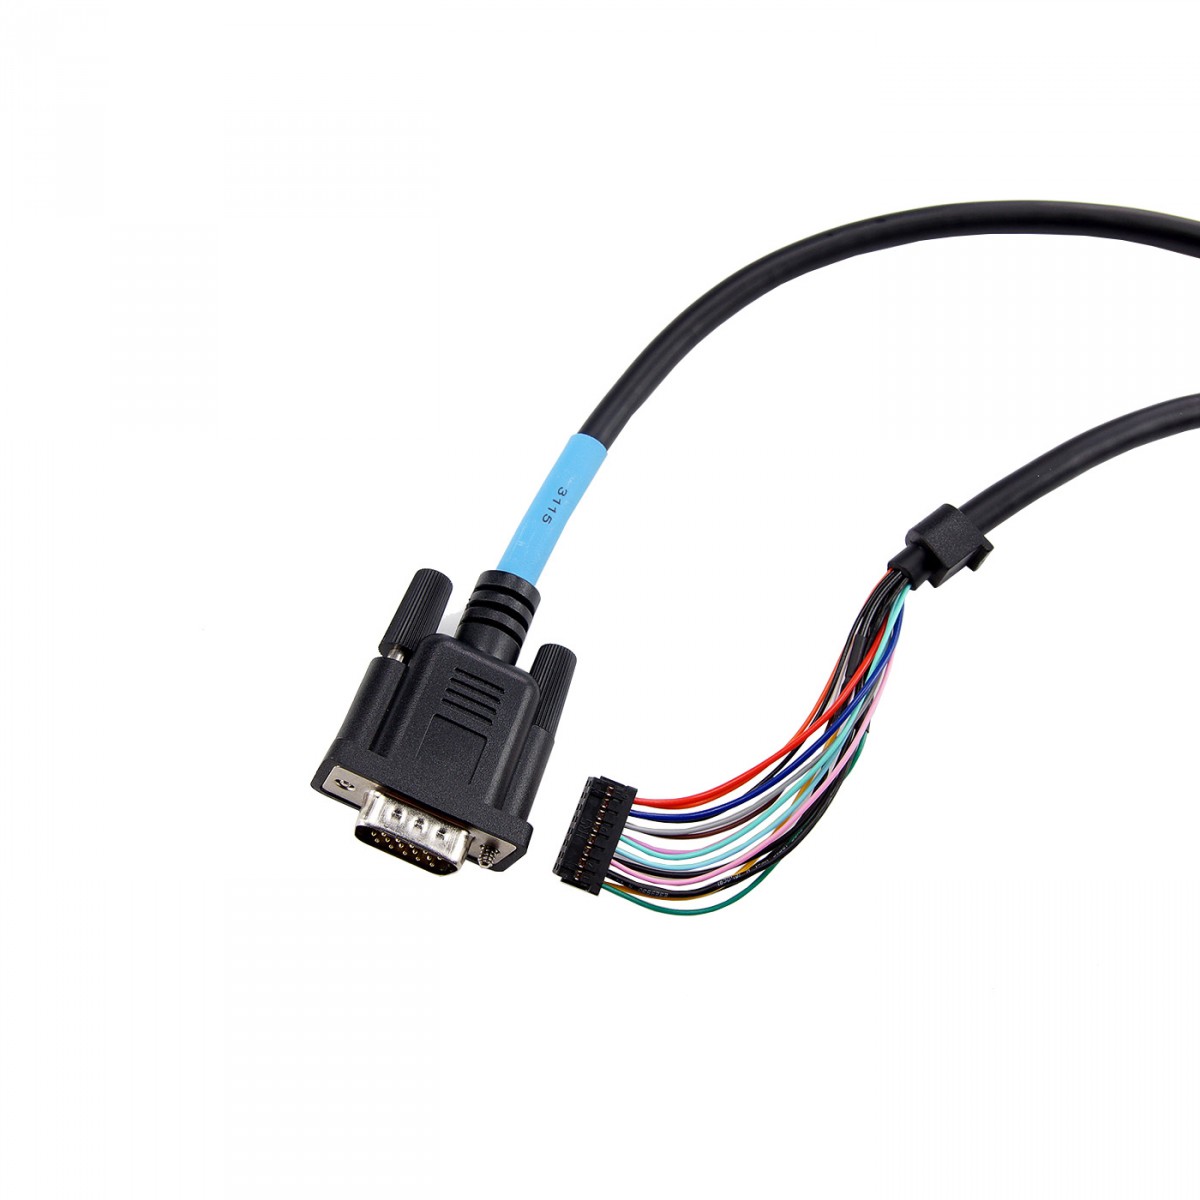 SEPURA connecting cable 07m for remote control 065876 300-00665